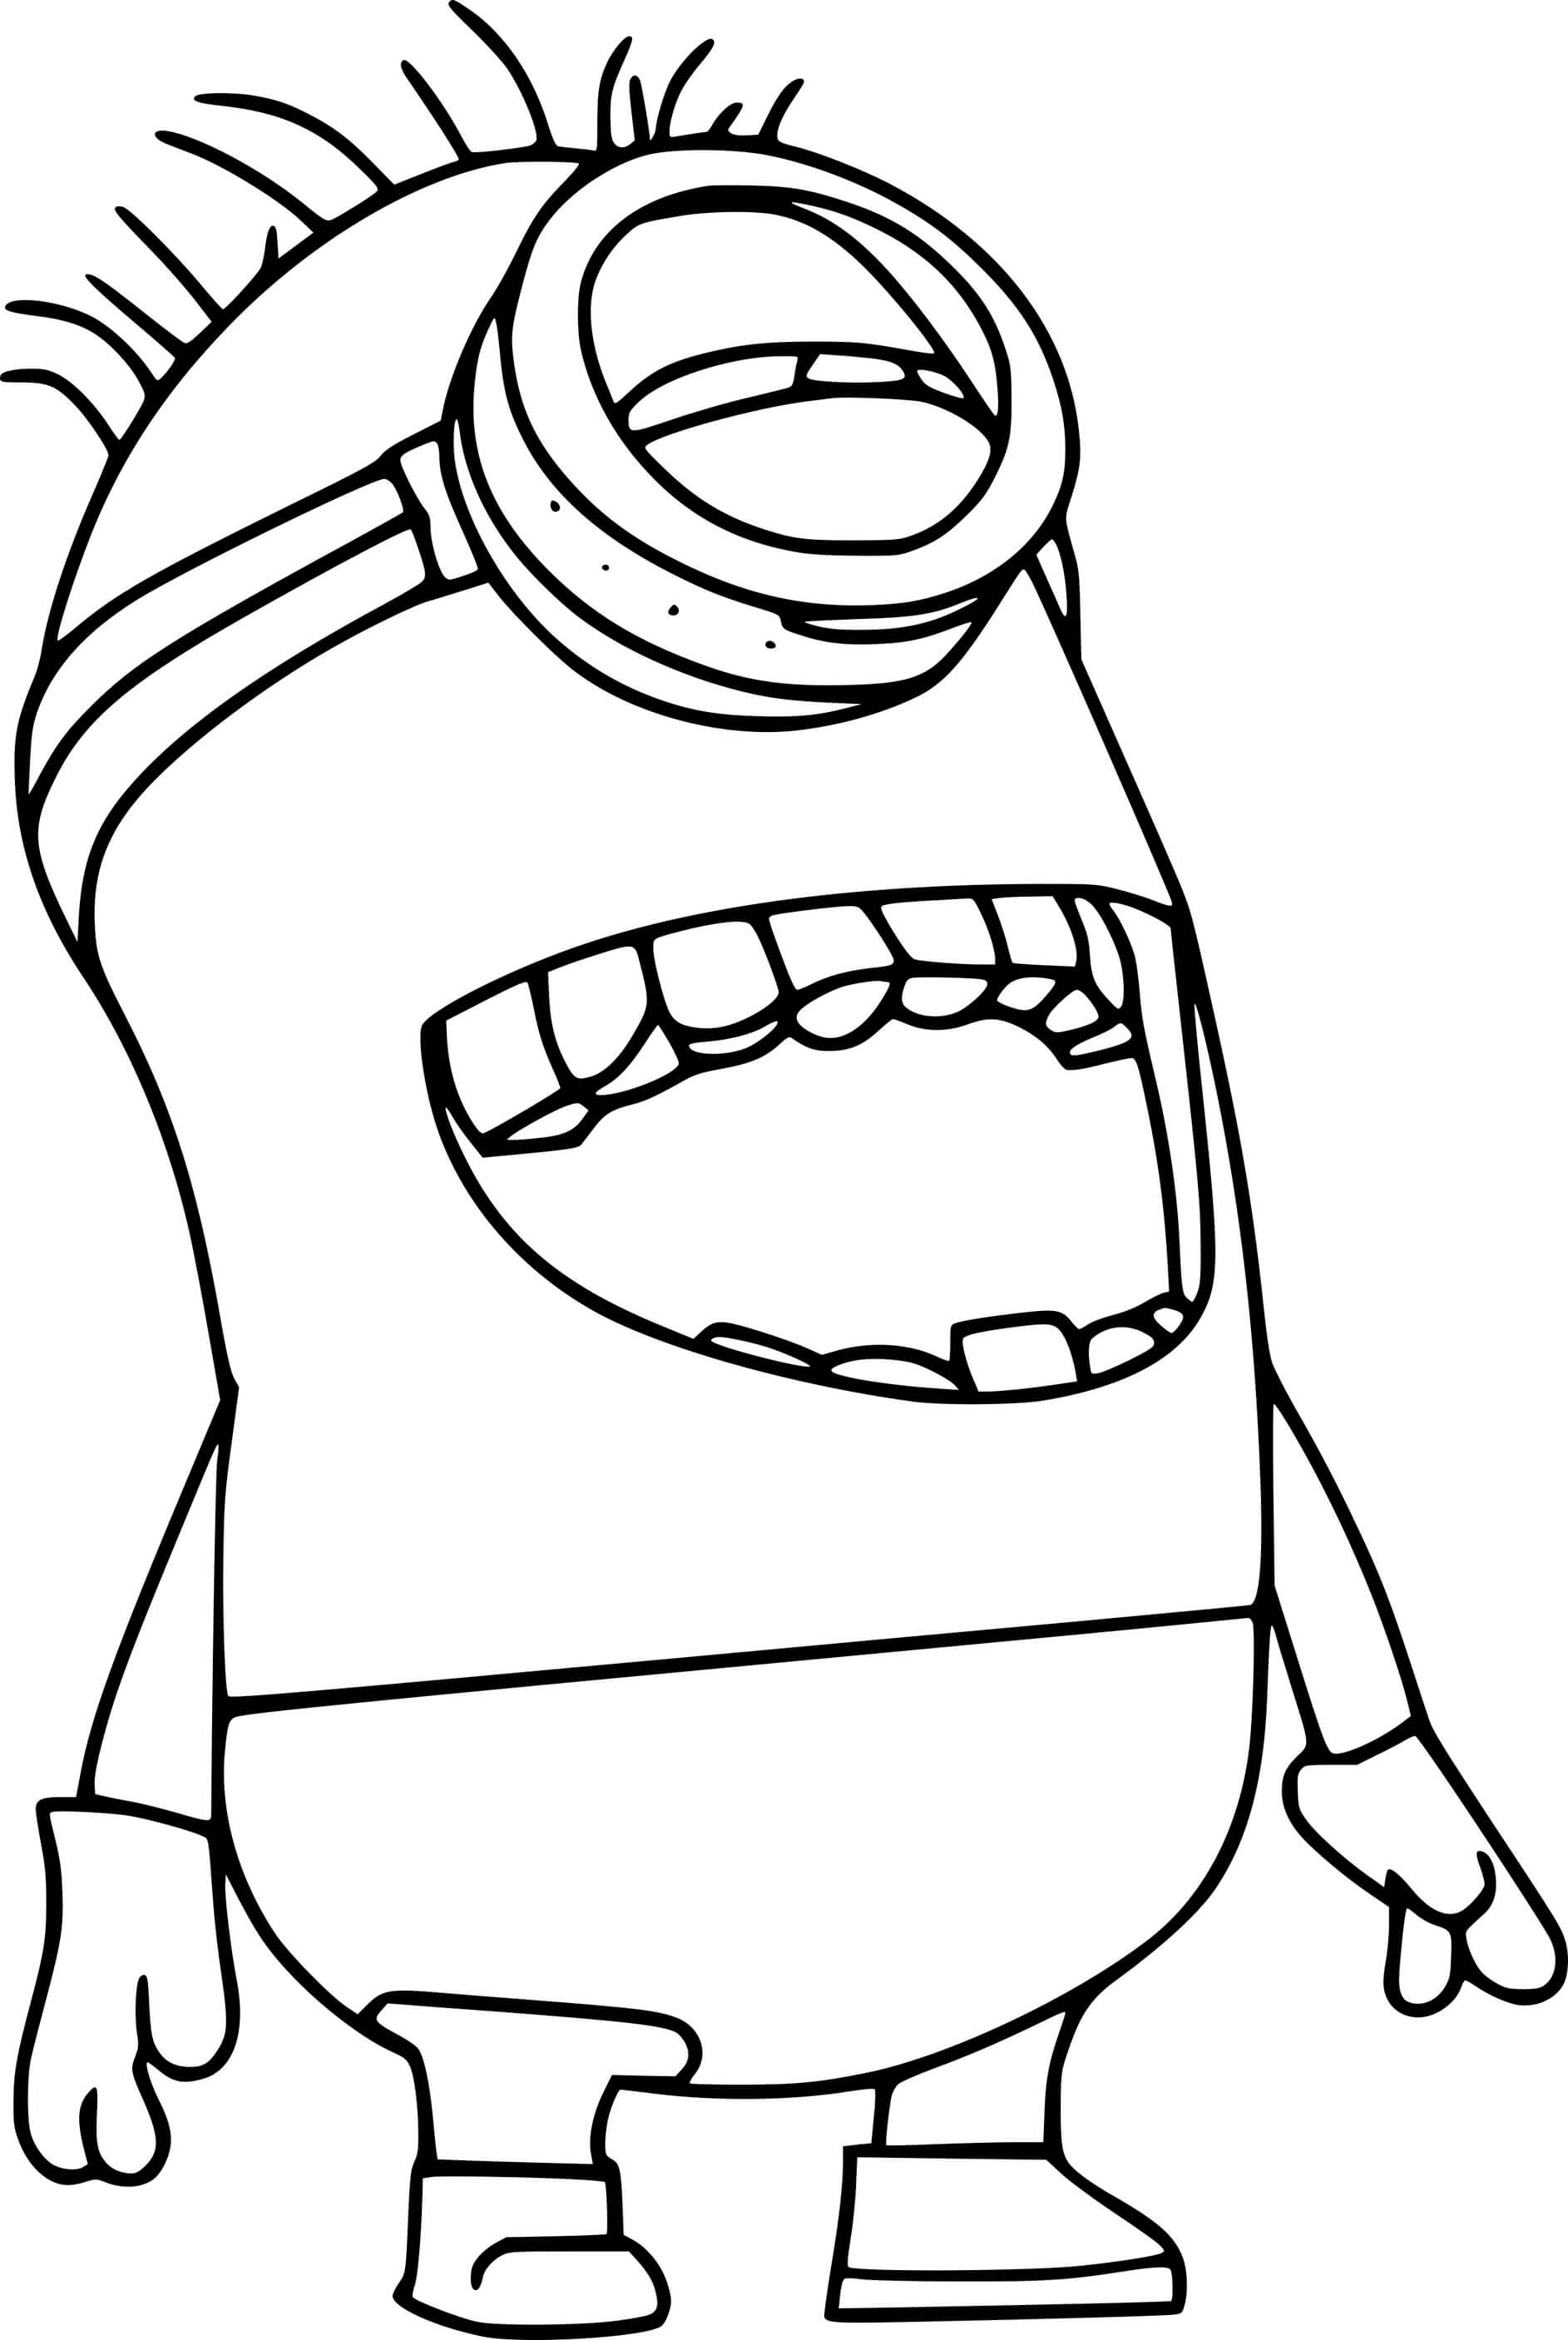 One Eye Minion Laughing Coloring Pages Coloring Cool